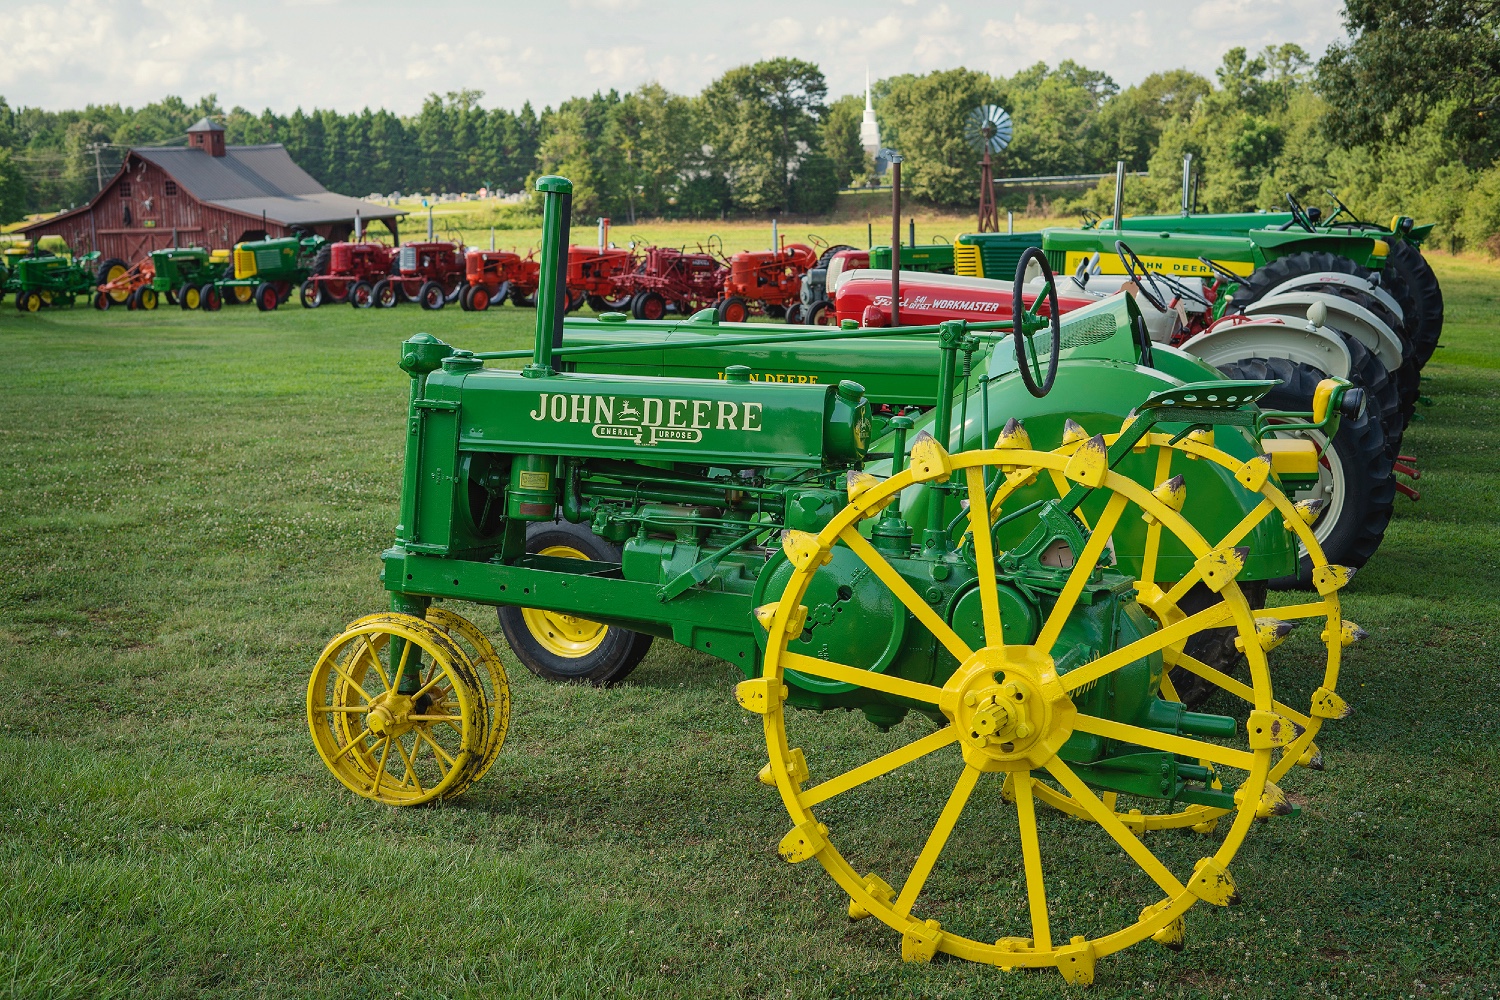 Wilson's donated tractor collection includes models dating back to 1919 valued at up to $40,000 each. (Photo/Provided)